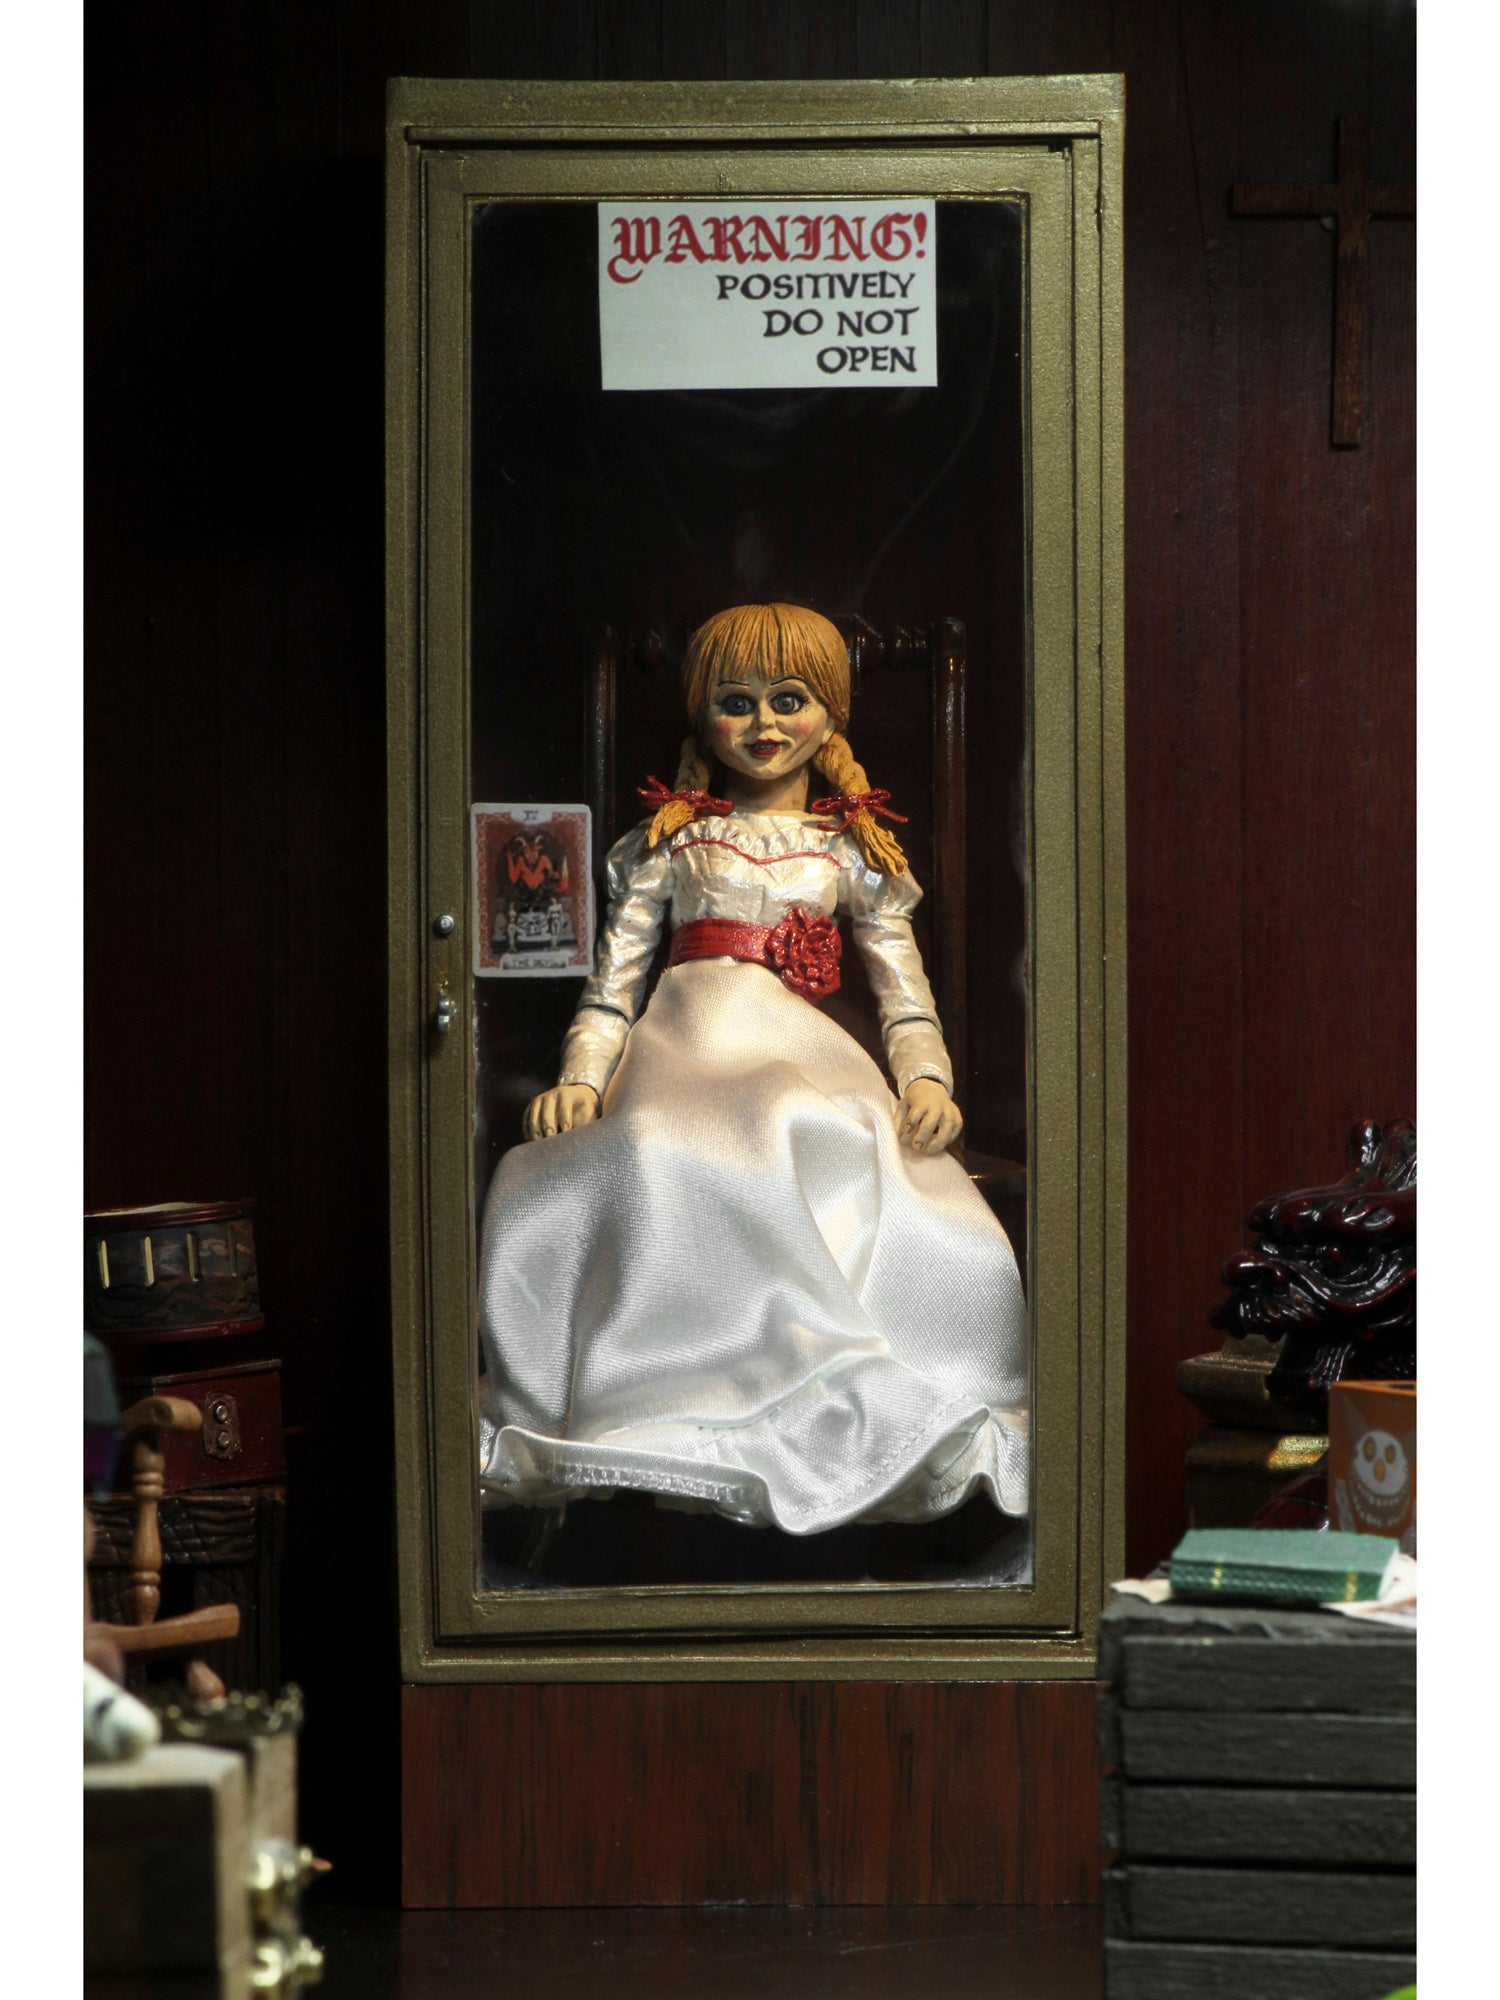 NECA - The Conjuring Universe - 7" Scale Action Figure - Ultimate Annabelle (Annabelle 3) - costumes.com